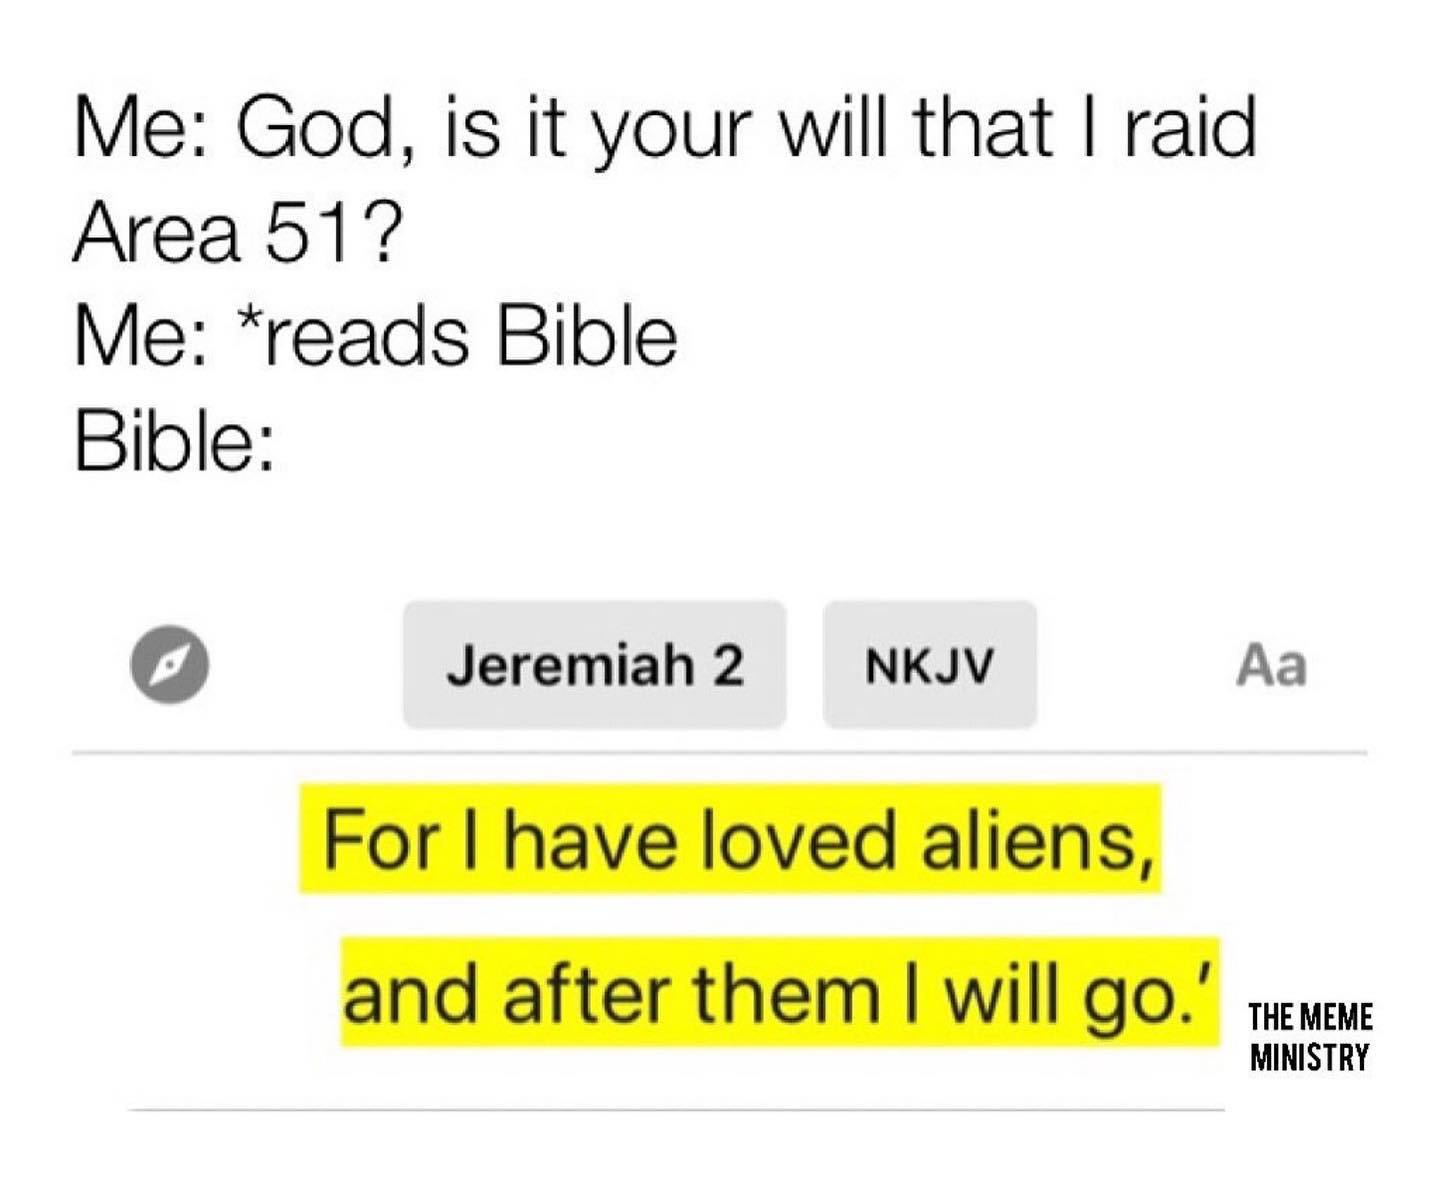 christian christian-memes christian text: Me: God, is it your will that I raid Area 51 Me: *reads Bible Bible: O Jeremiah 2 NKJV For I have loved aliens, and after them I will go.' THE MEME MINISTRY 